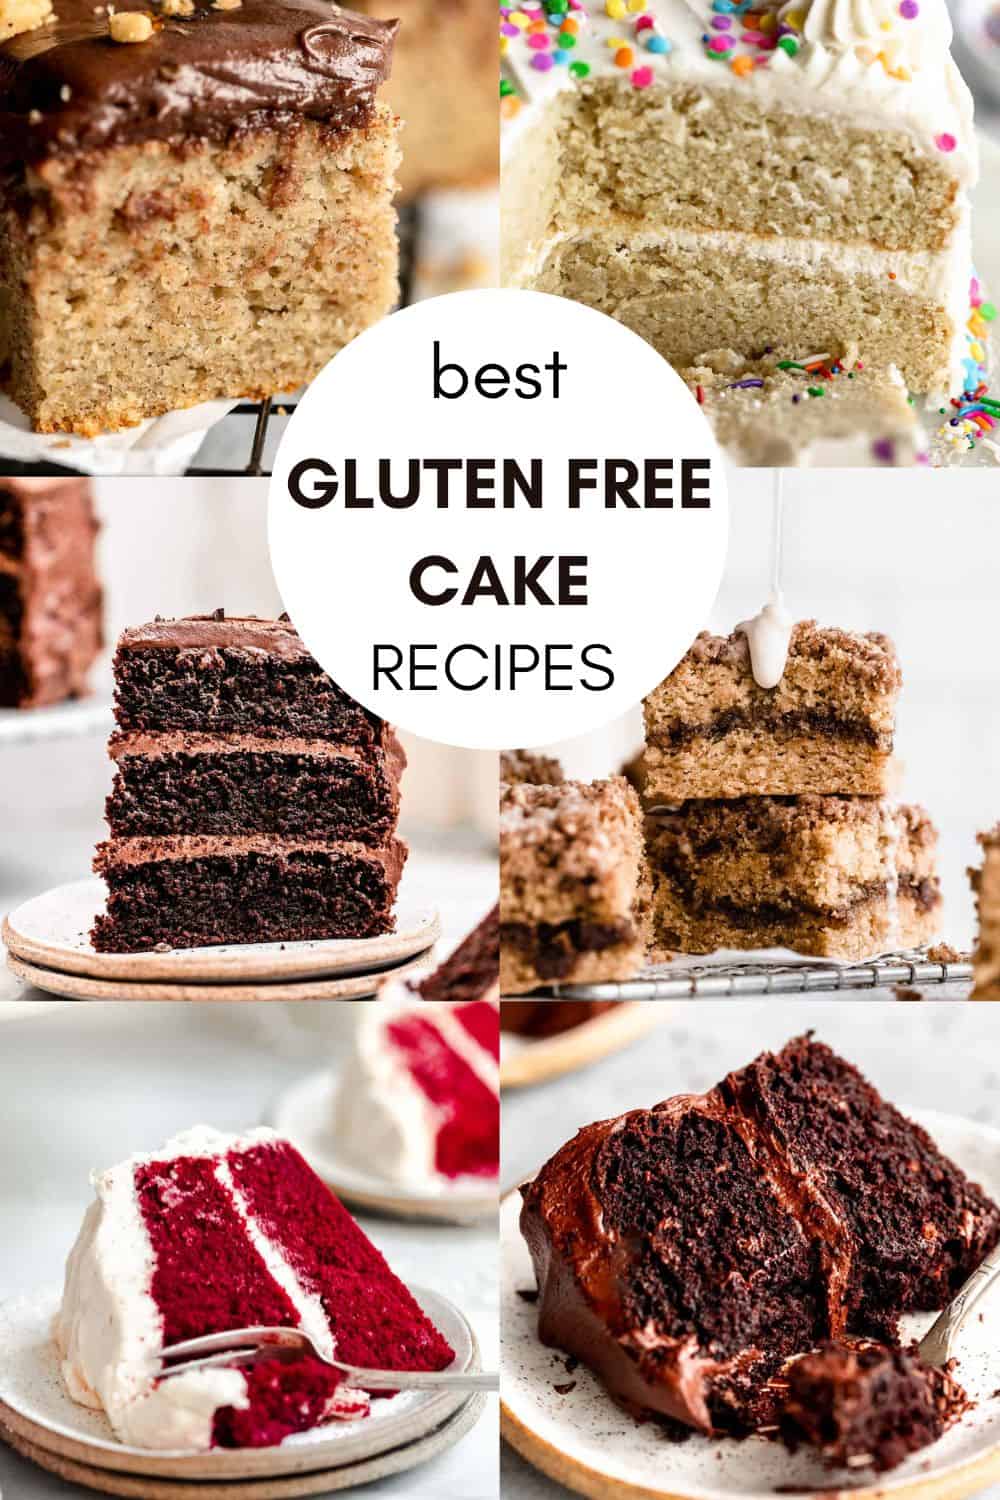 six image collage showing gluten free cakes